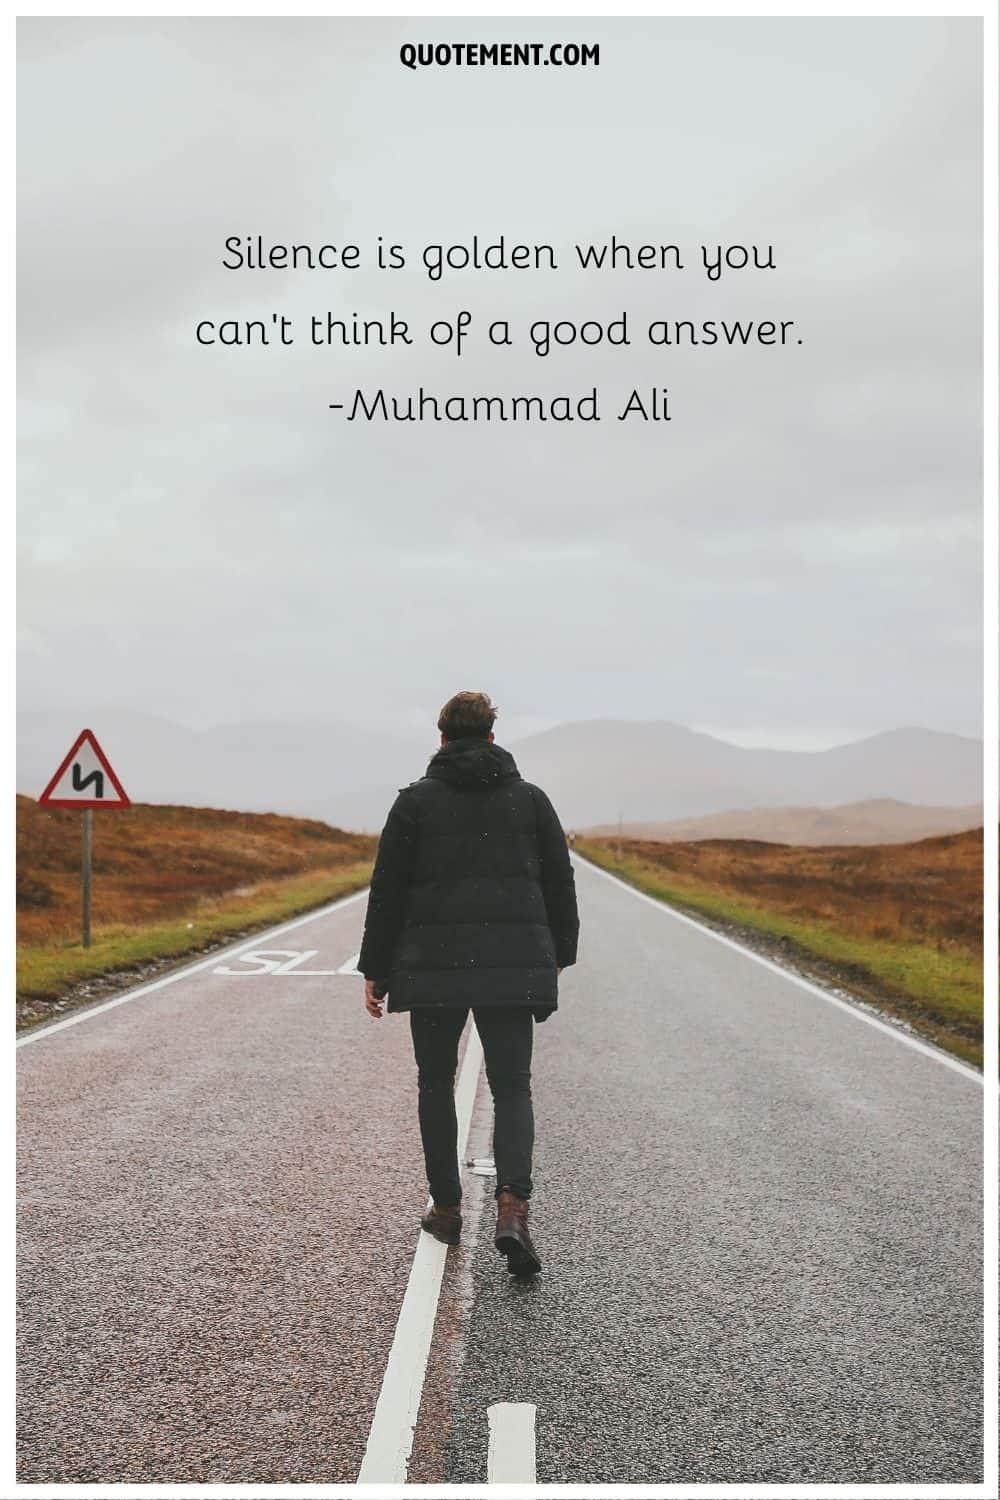 “Silence is golden when you can't think of a good answer.” ― Muhammad Ali